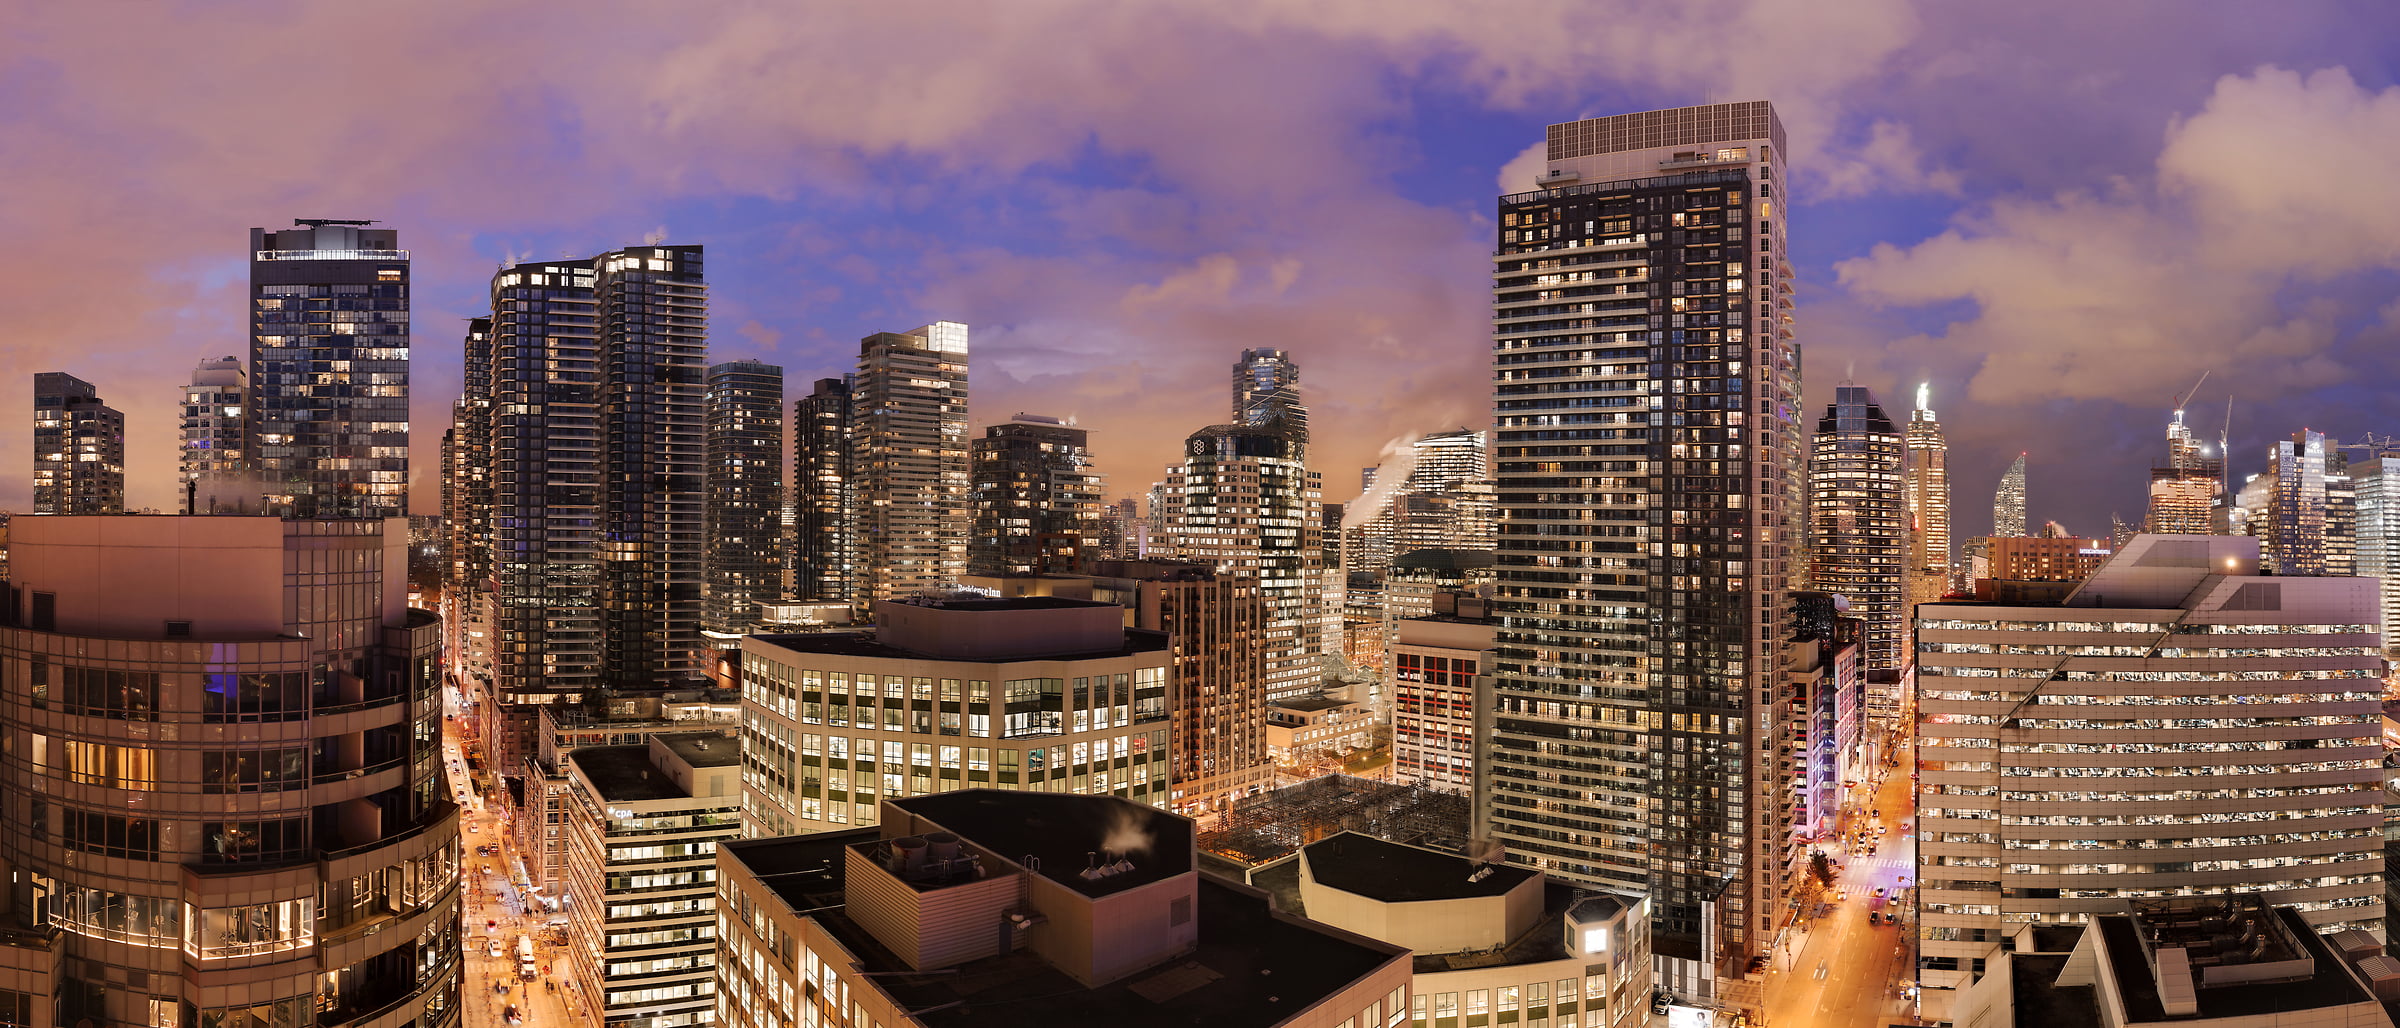 372 megapixels! A very high resolution, large-format VAST photo print of a city skyline taken from among the city buildings at night; cityscape photograph created by Phil Crawshay in Downtown Toronto, Ontario, Canada